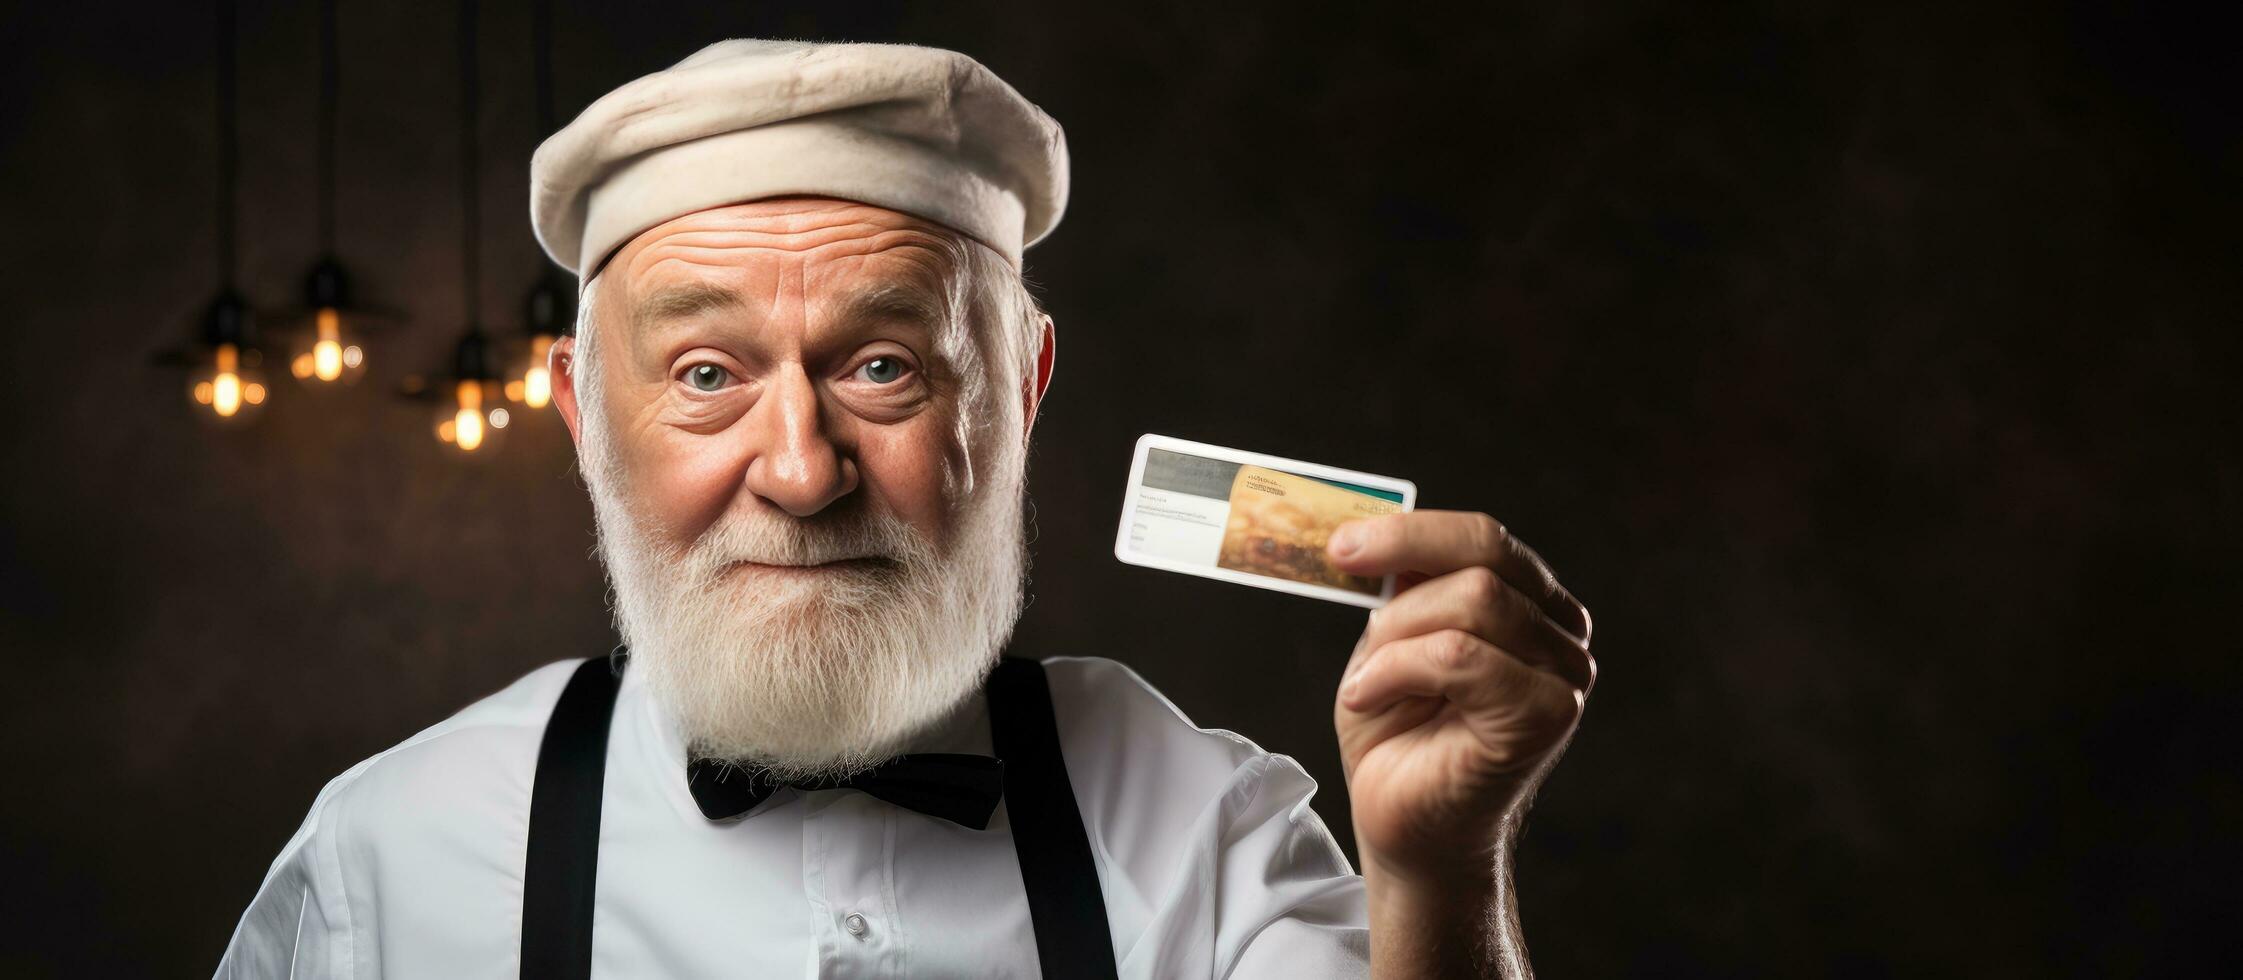 Elderly man in apron points to blank space holding credit card concept of cashless money photo